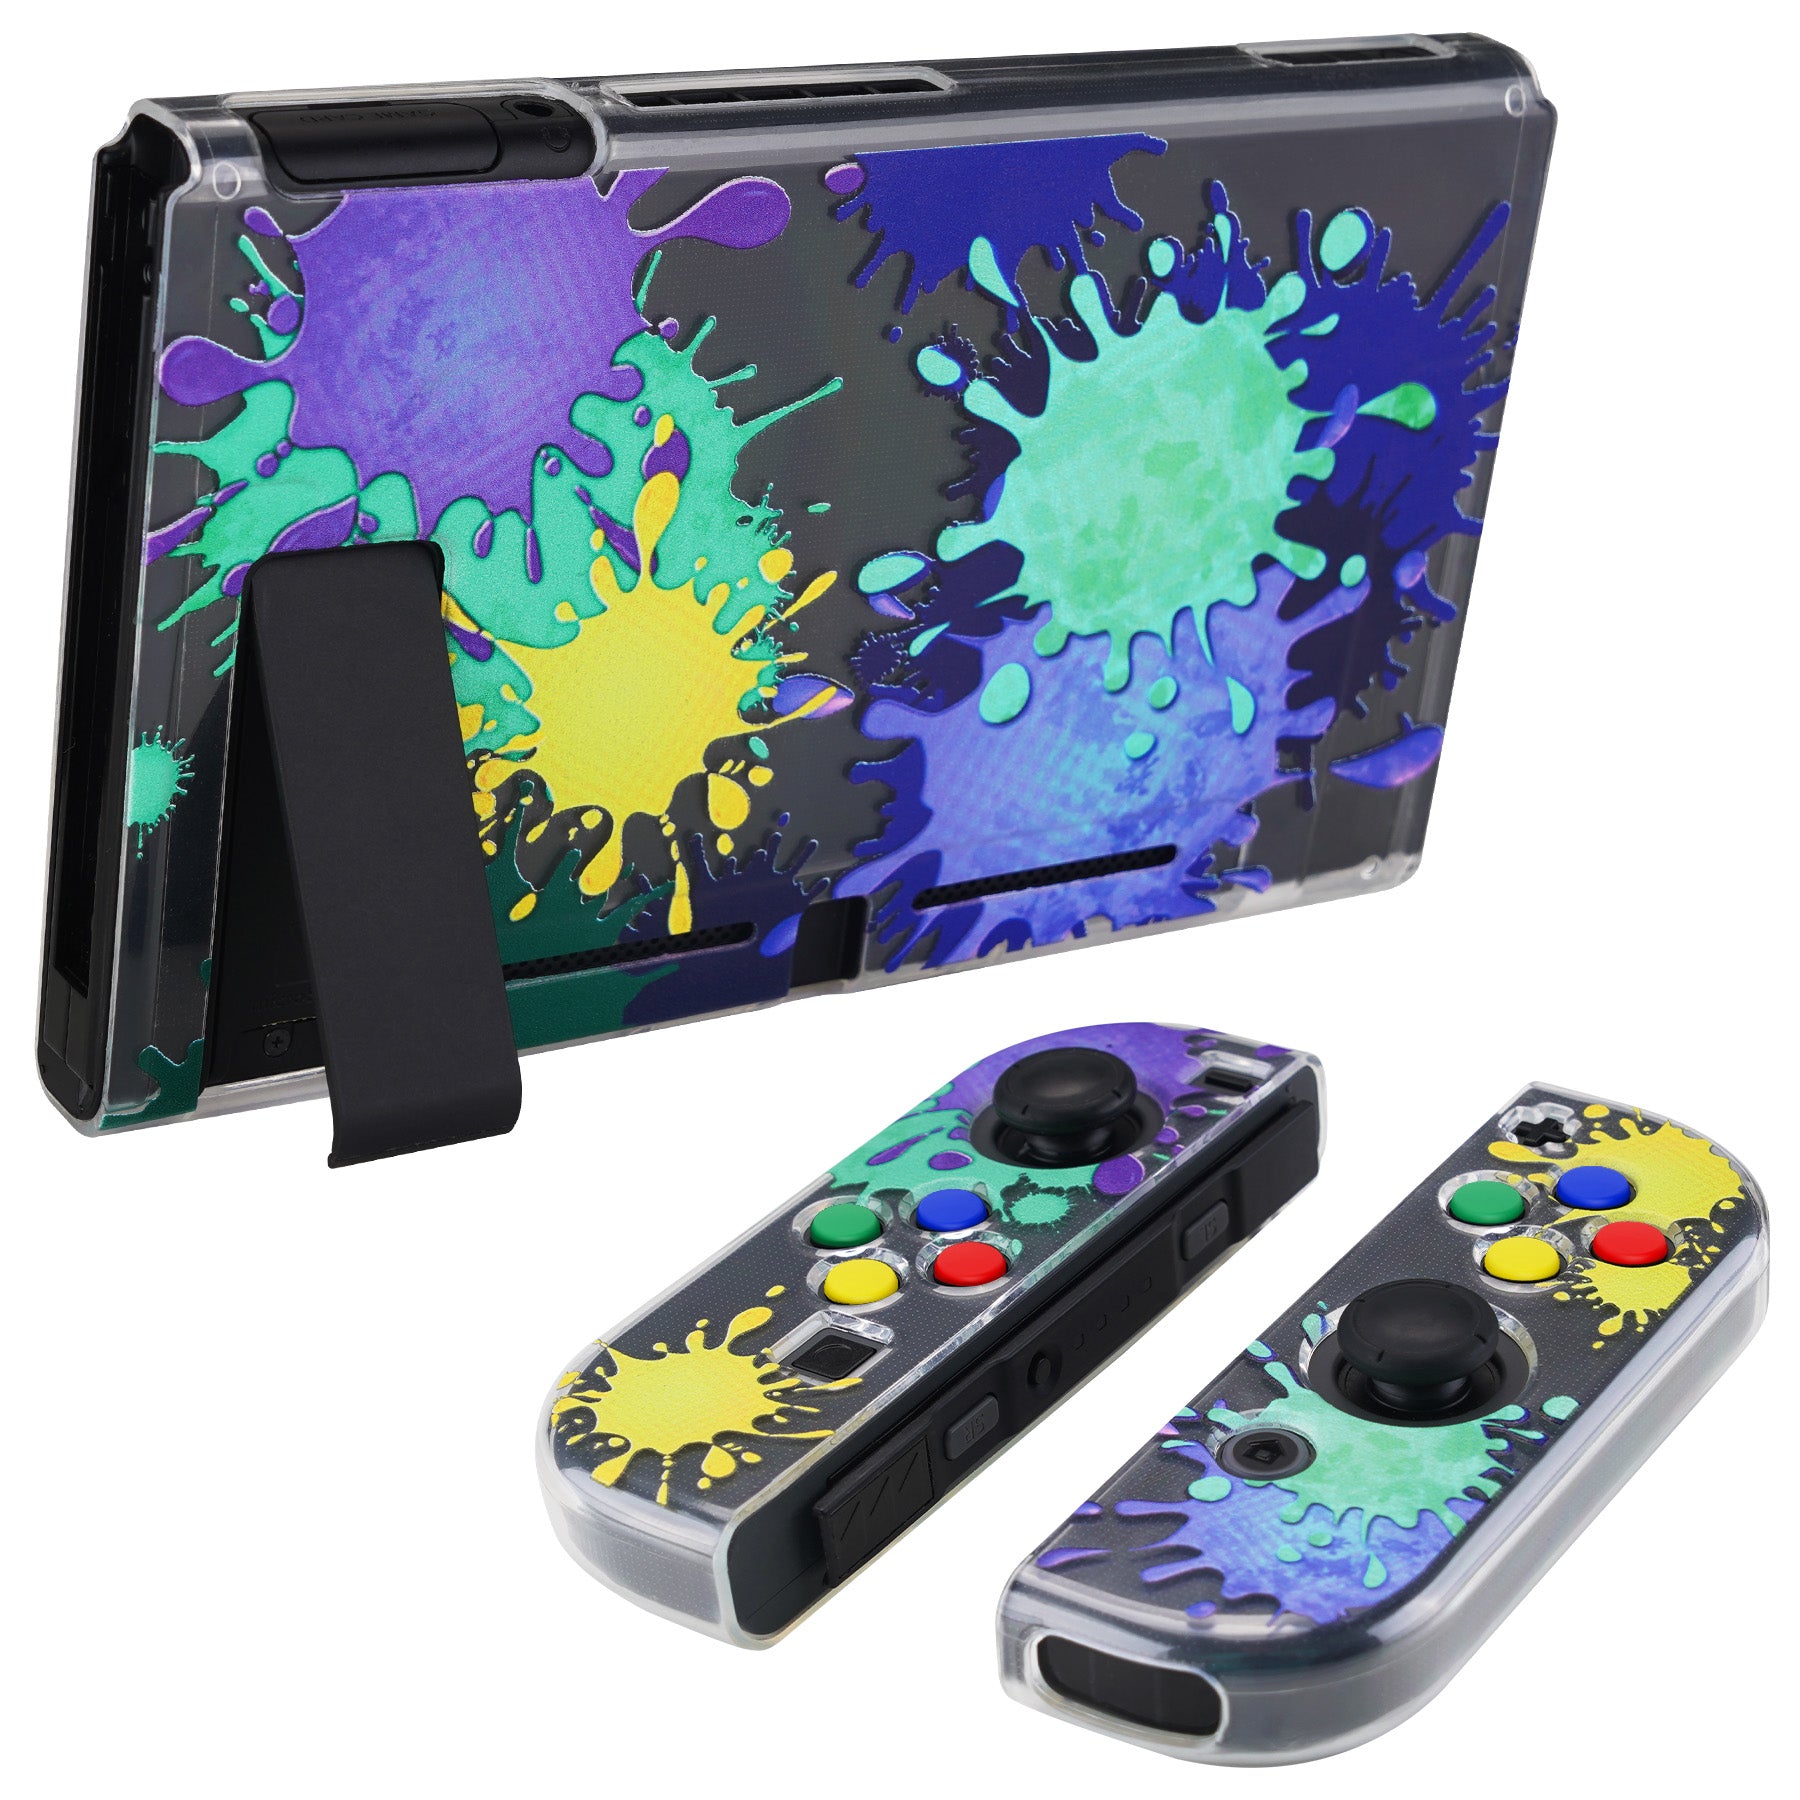 PlayVital Protective Case for Nintendo Switch, Soft TPU Slim Case Cover for Nintendo Switch Console with Colorful ABXY Direction Button Caps - Splattering Paint - NTU6030 PlayVital